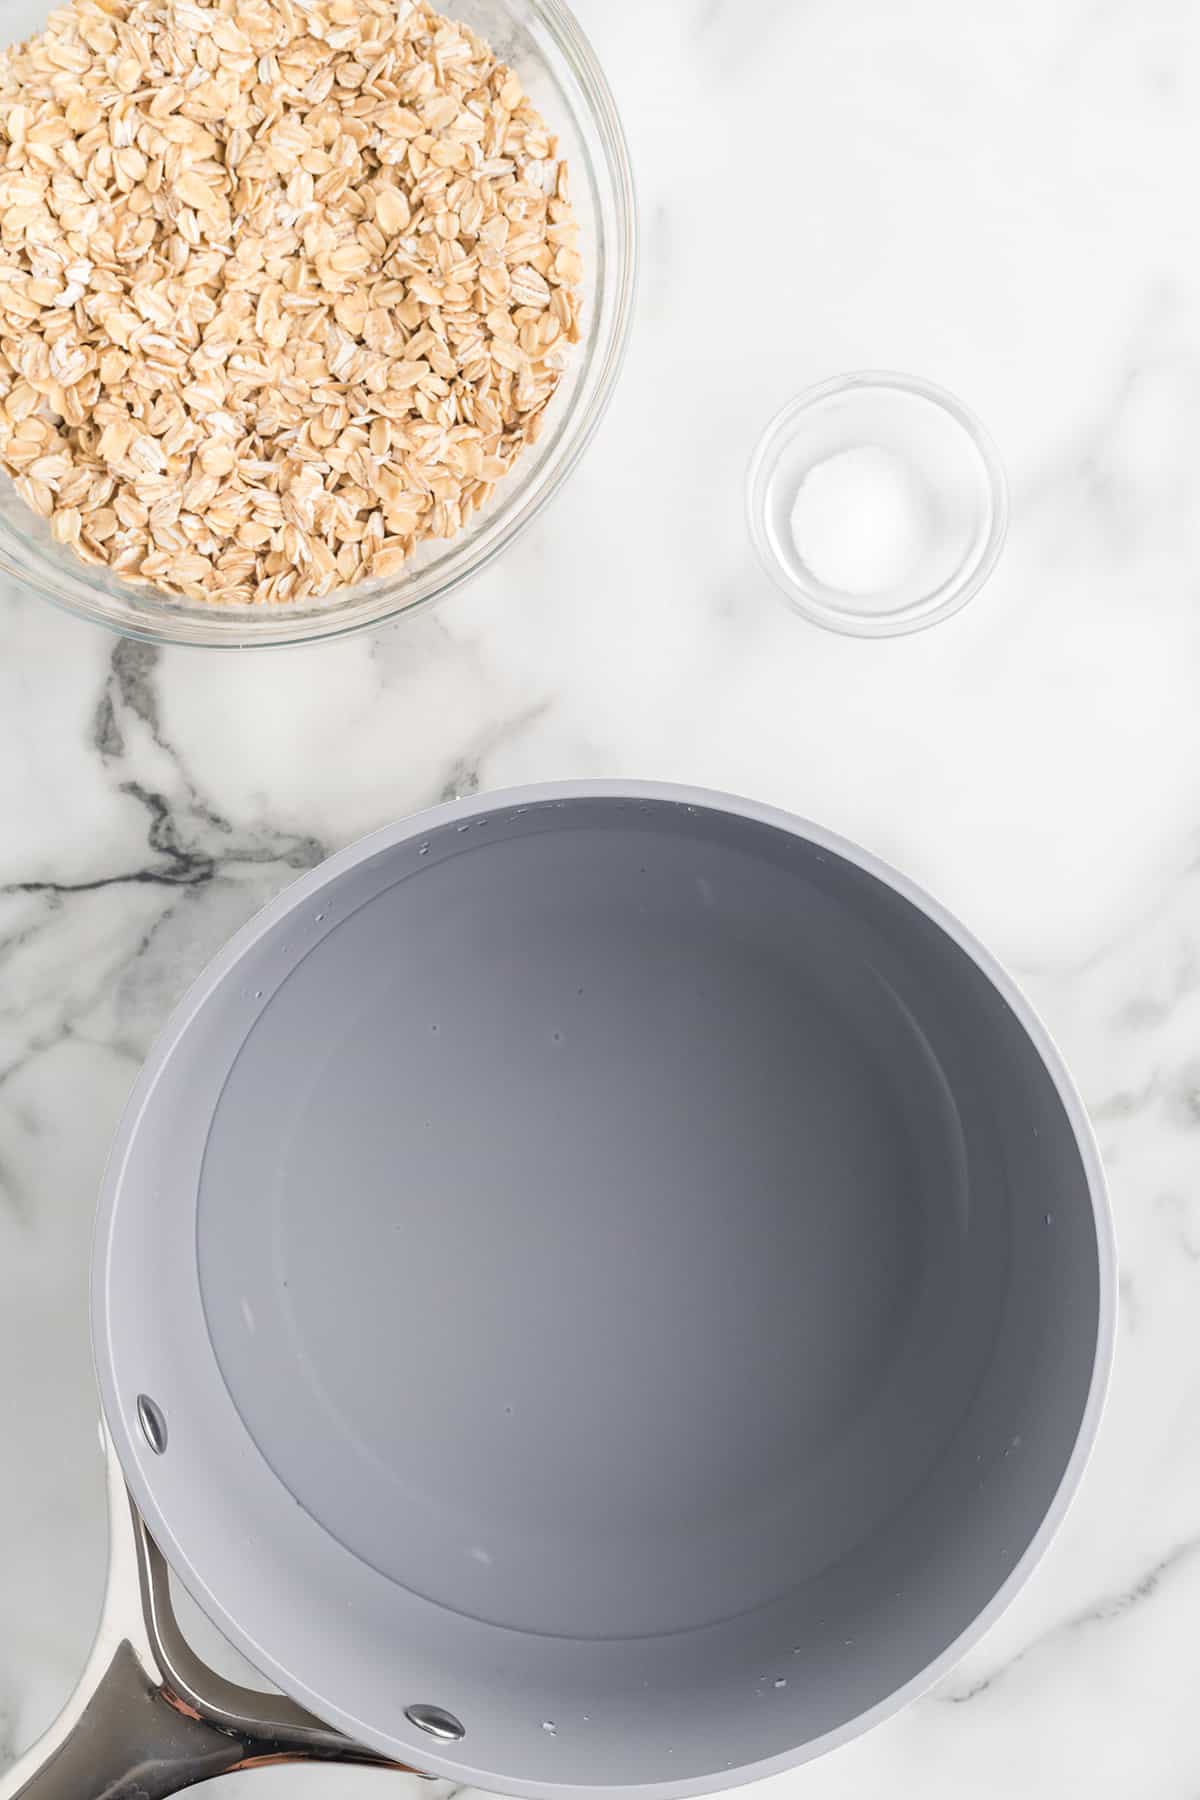 A saucepan with water and salt; a bowl of rolled oats in the background.